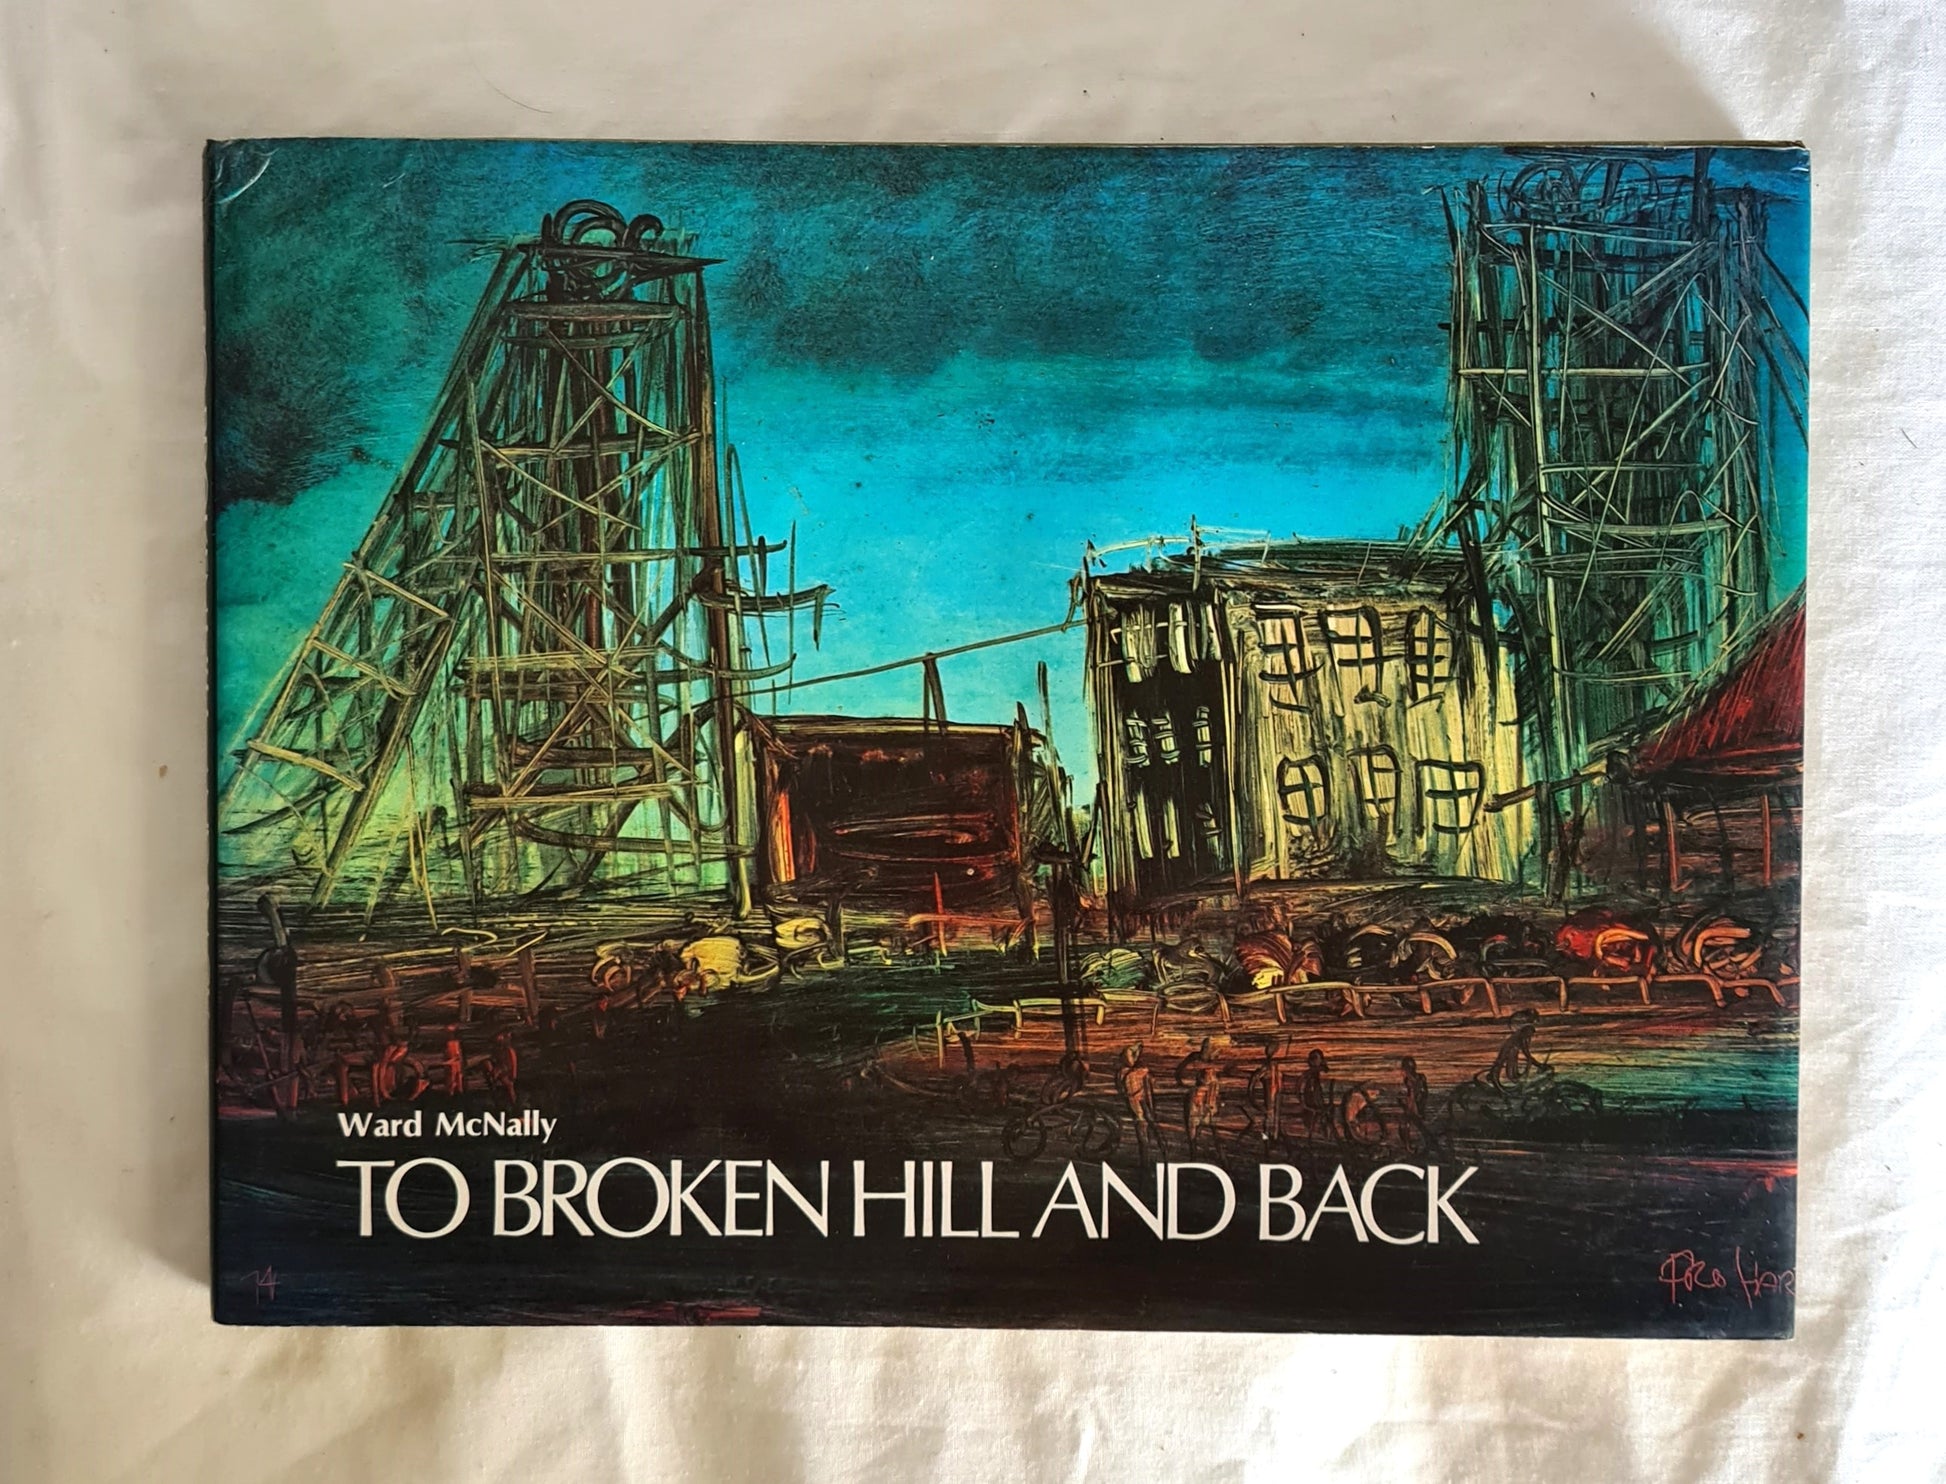 To Broken Hill and Back  by Ward McNally  Photographs by Ron Bentley